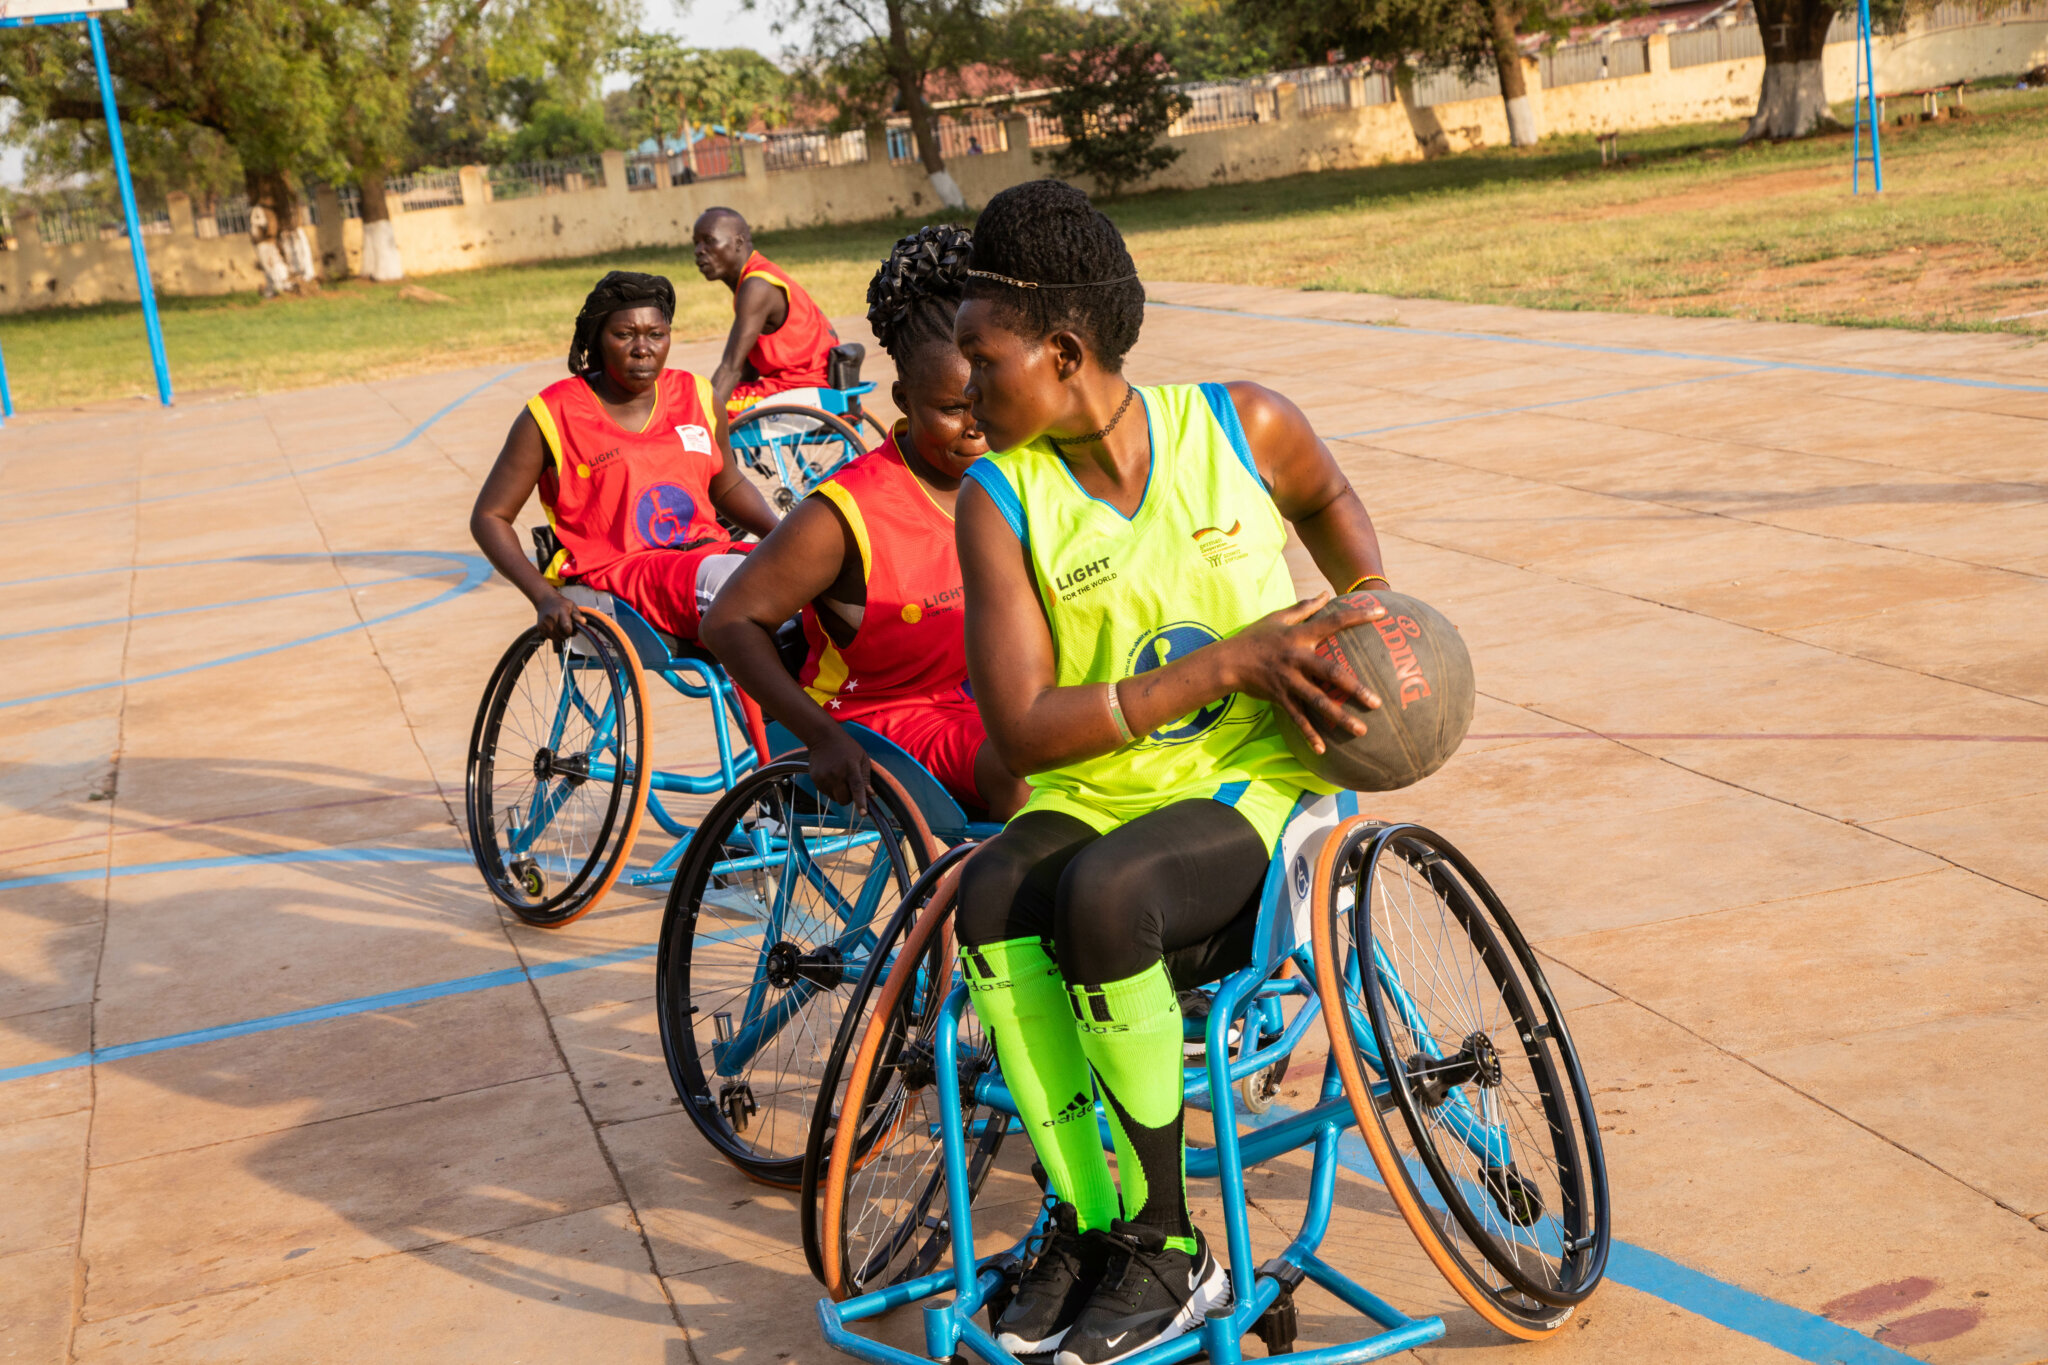 Four women in wheelchairs are playing basketball on a big field. One woman in a yellow shirt is dribbling the ball.